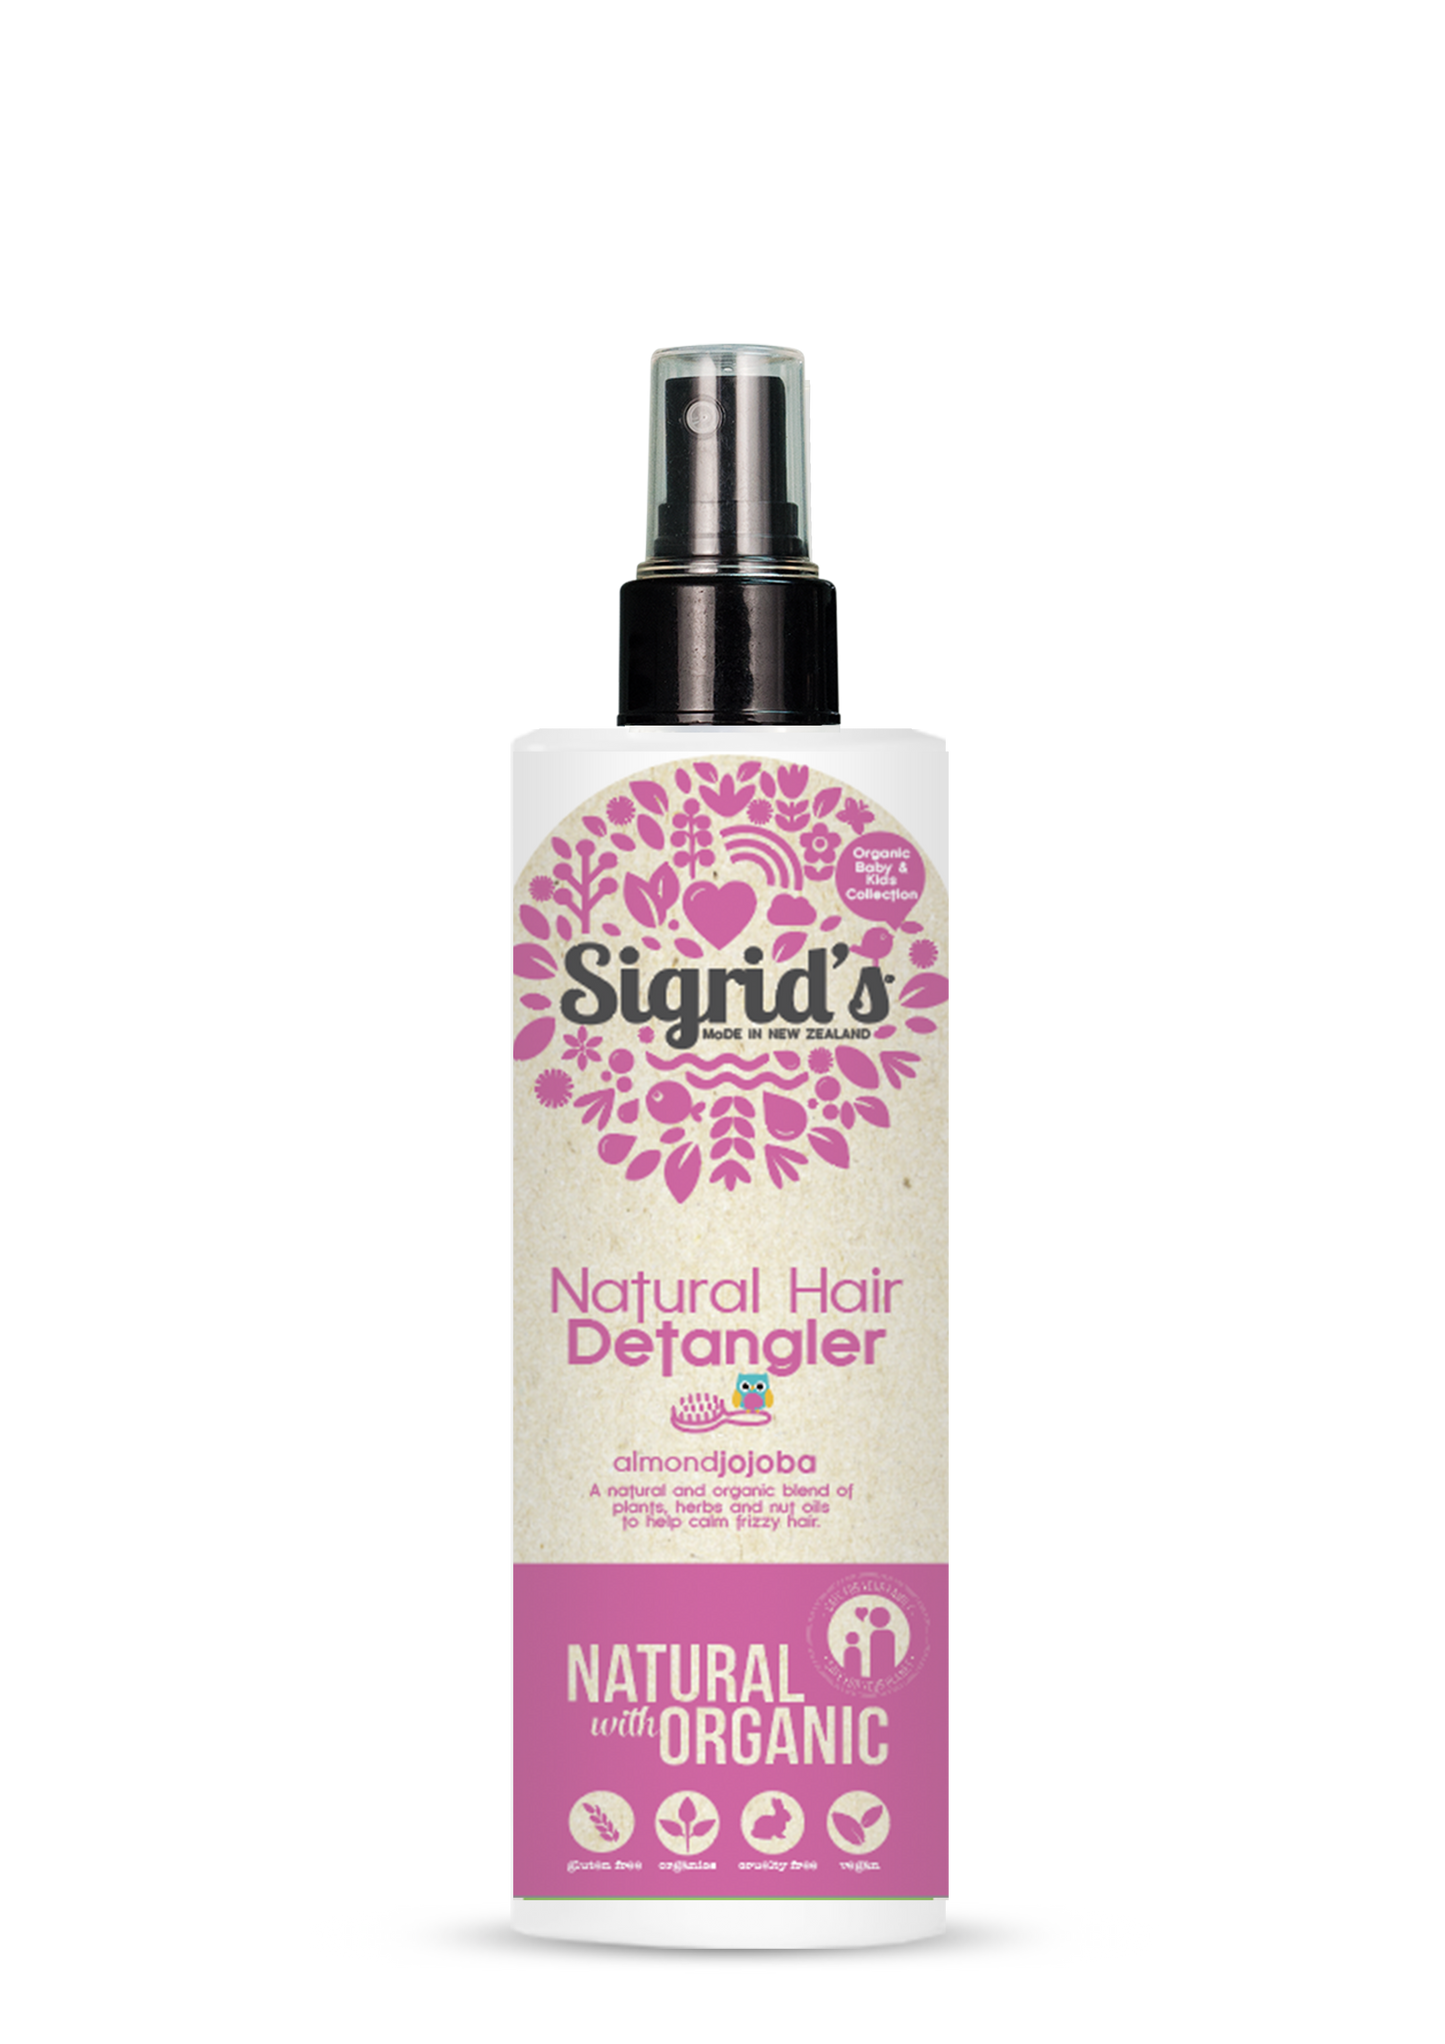 Natural Hair Detangler, with organic extracts